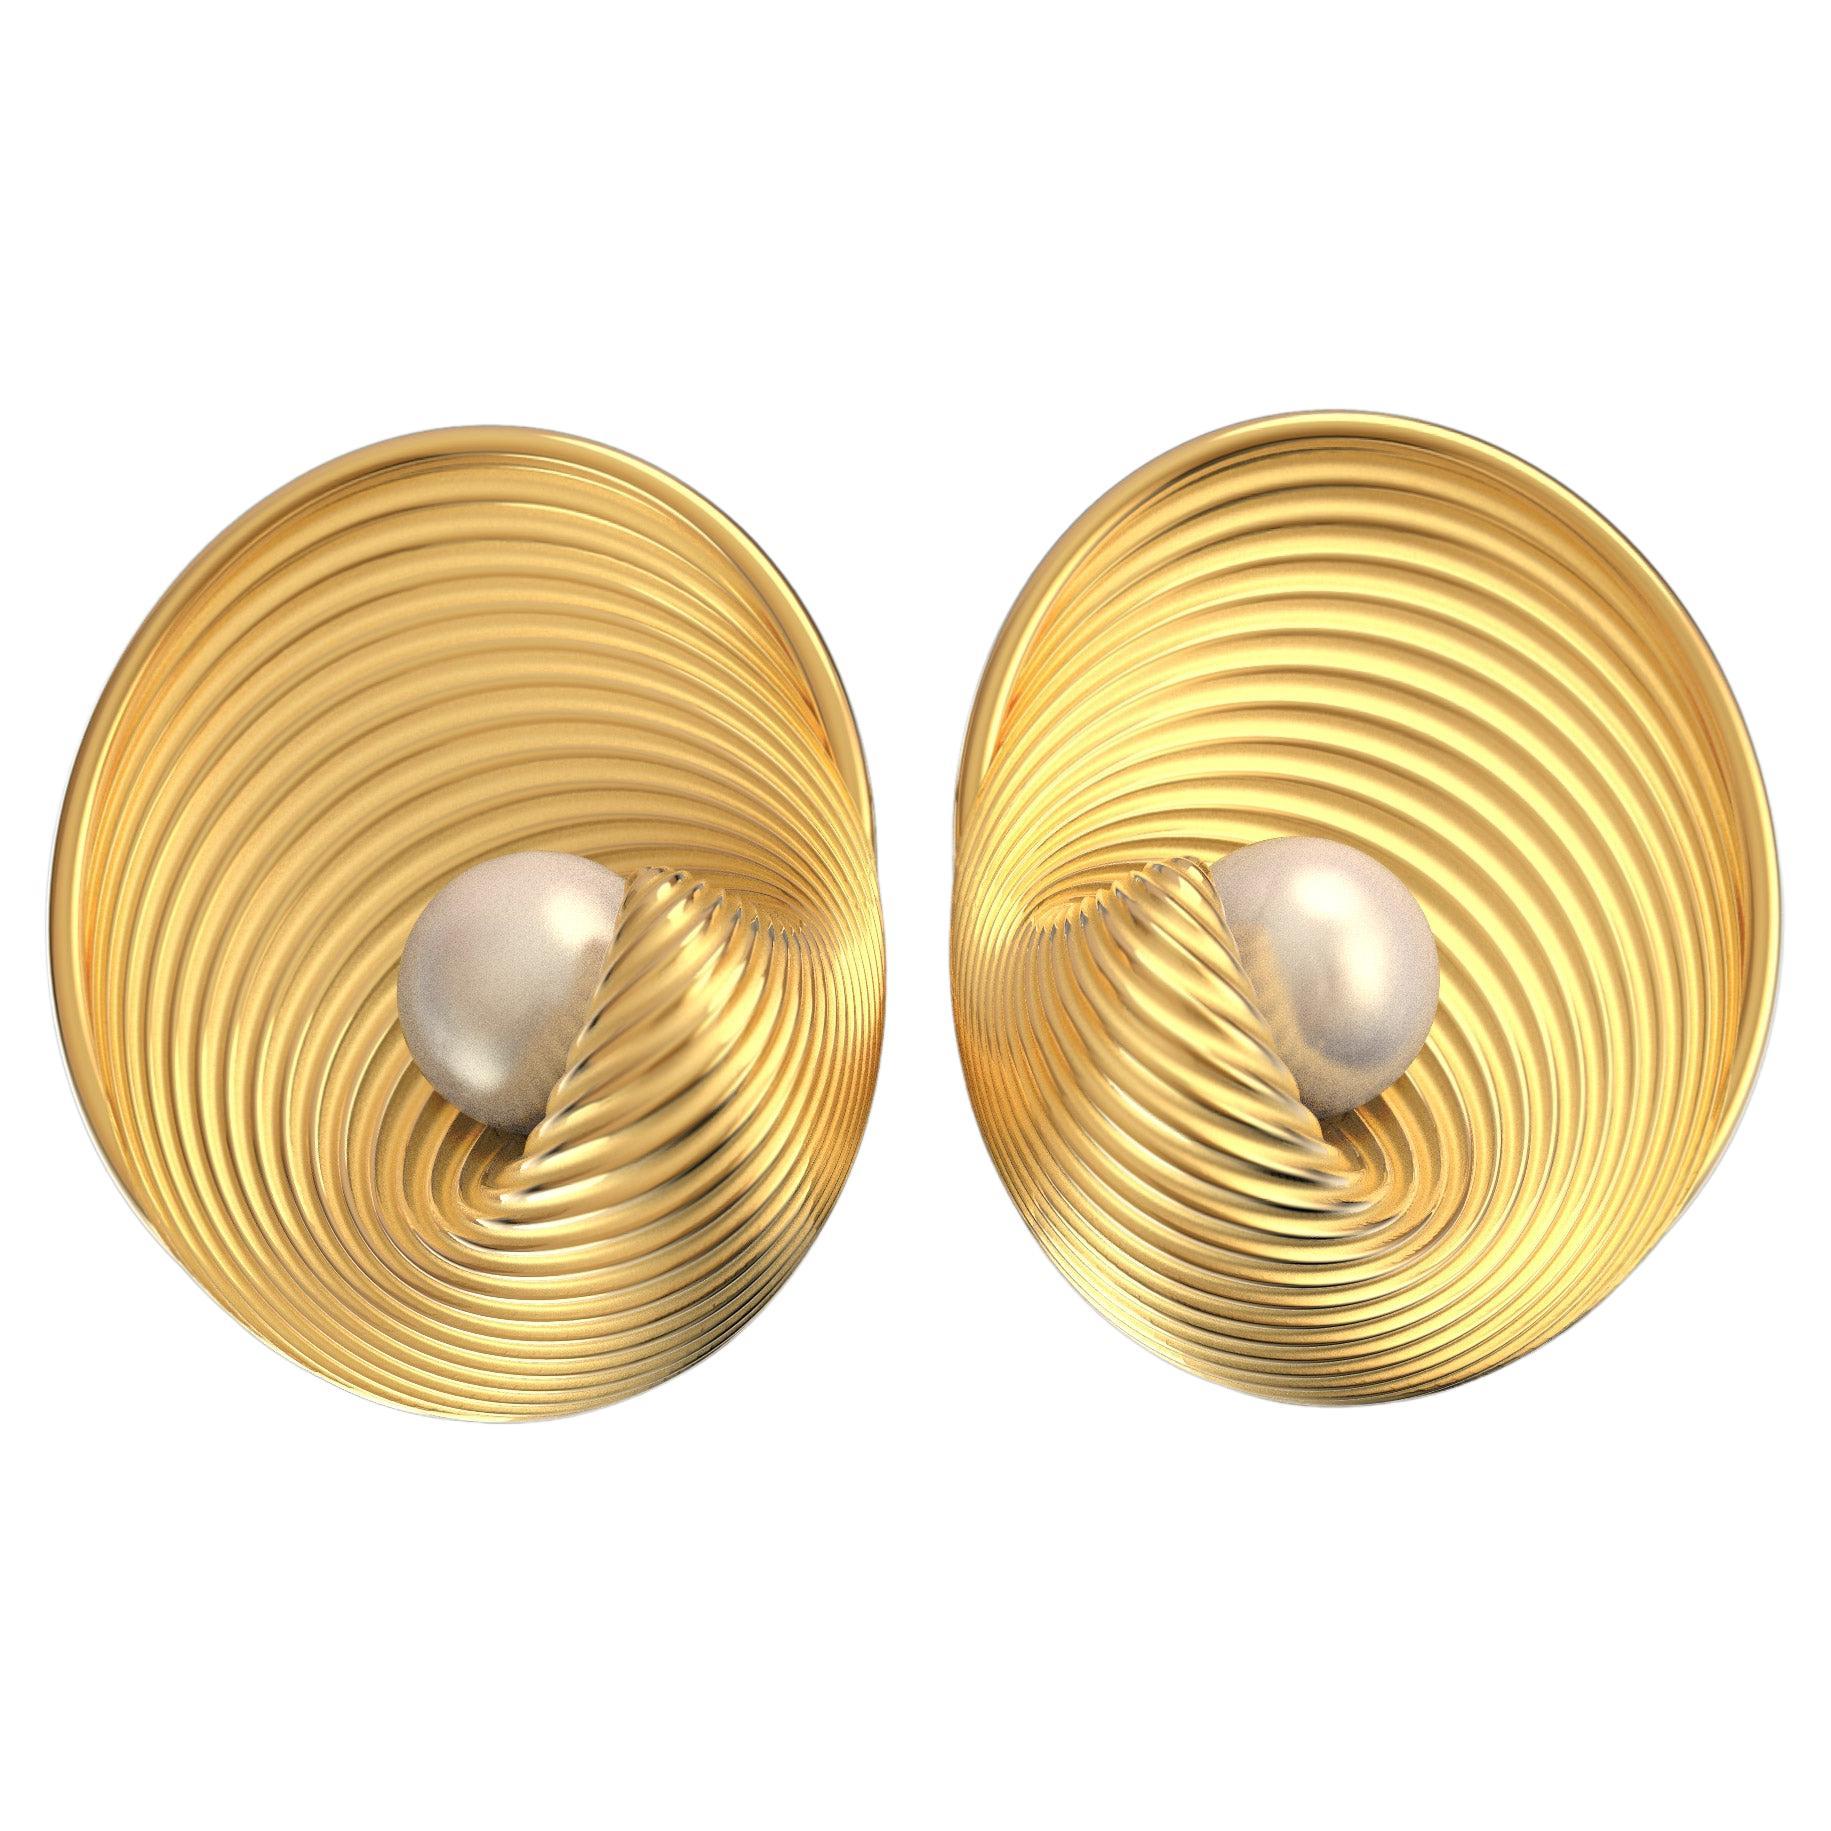 Italian 14k Gold Akoya Pearl Earrings Made in Italy by  Oltremare Gioielli In New Condition For Sale In Camisano Vicentino, VI